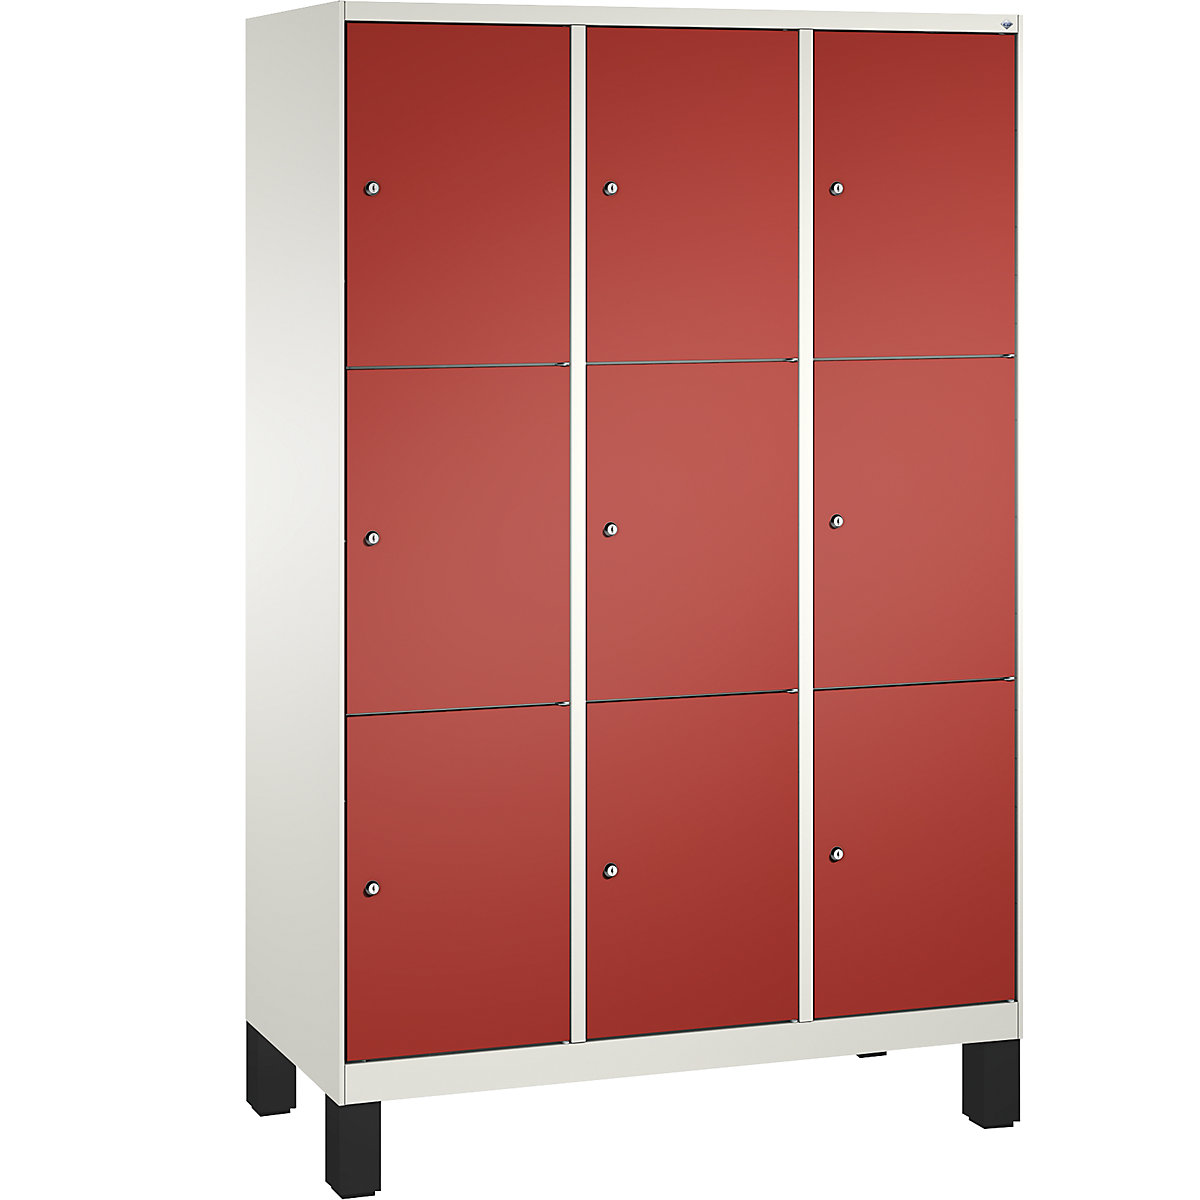 EVOLO locker unit, with feet – C+P, 3 compartments, 3 shelf compartments each, compartment width 400 mm, traffic white / flame red-15